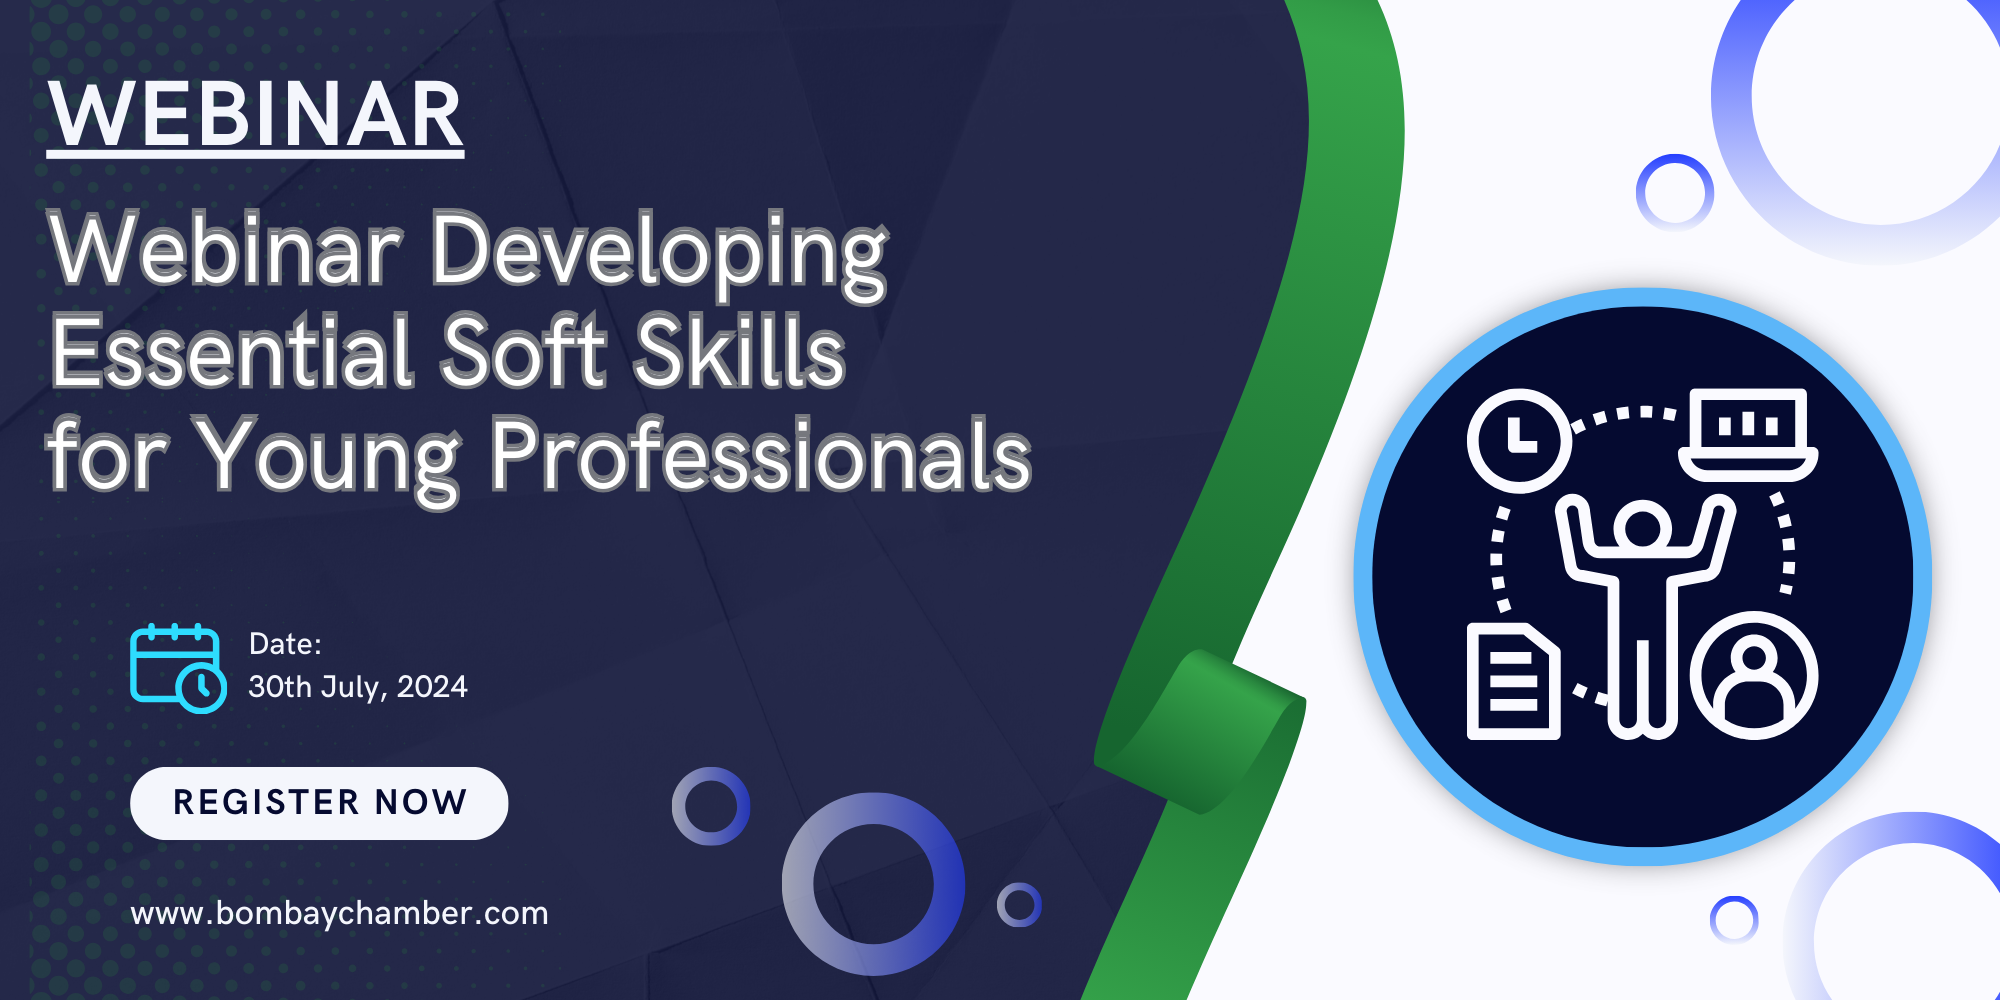 Webinar on Developing Essential Soft Skills for Young Professionals